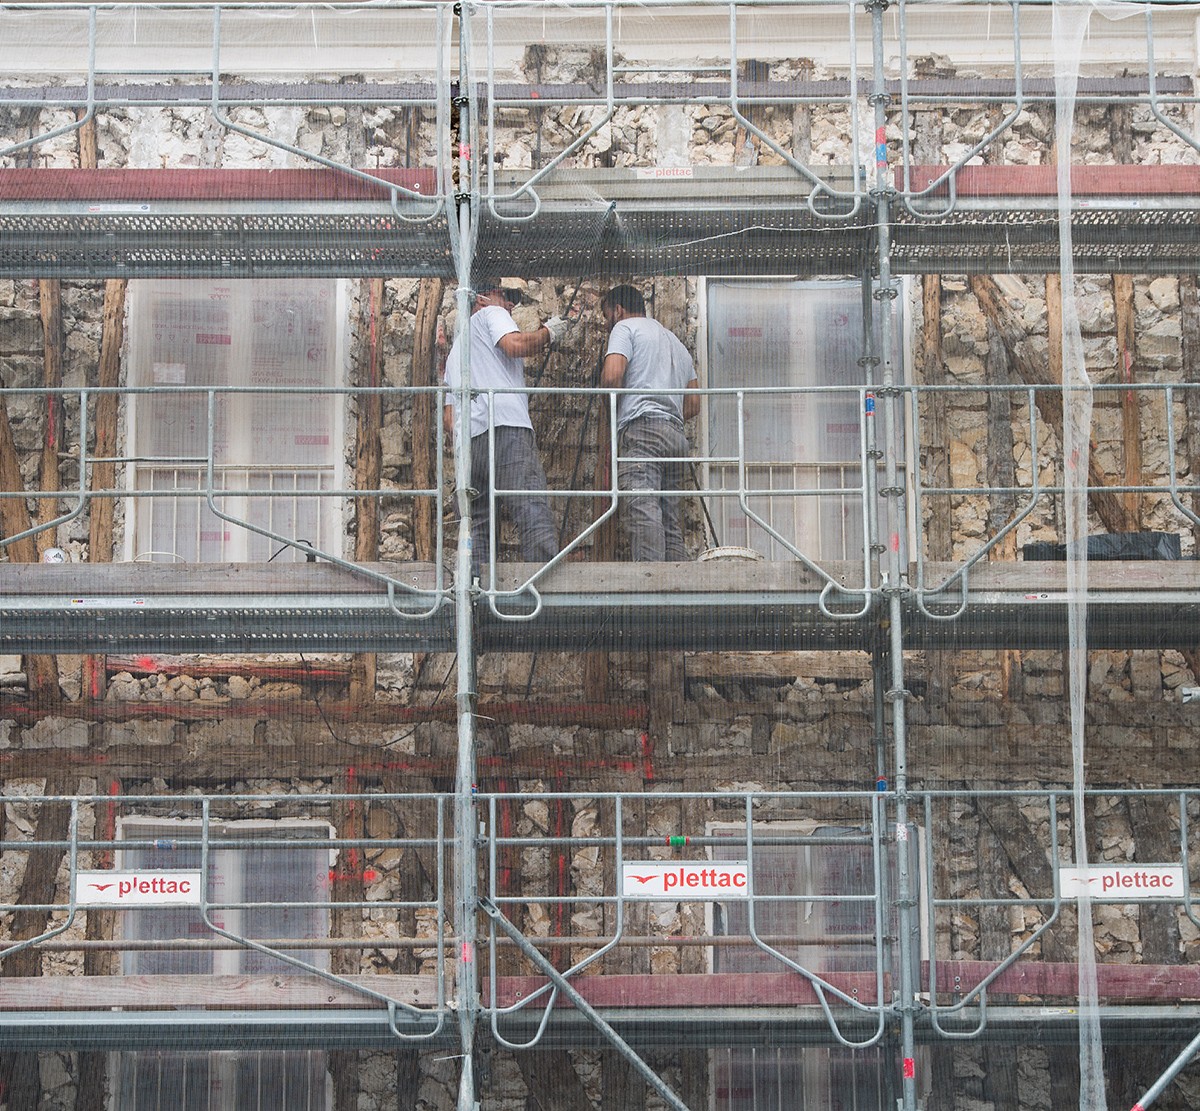 Photograph of workers on scaffolding re-facing a building